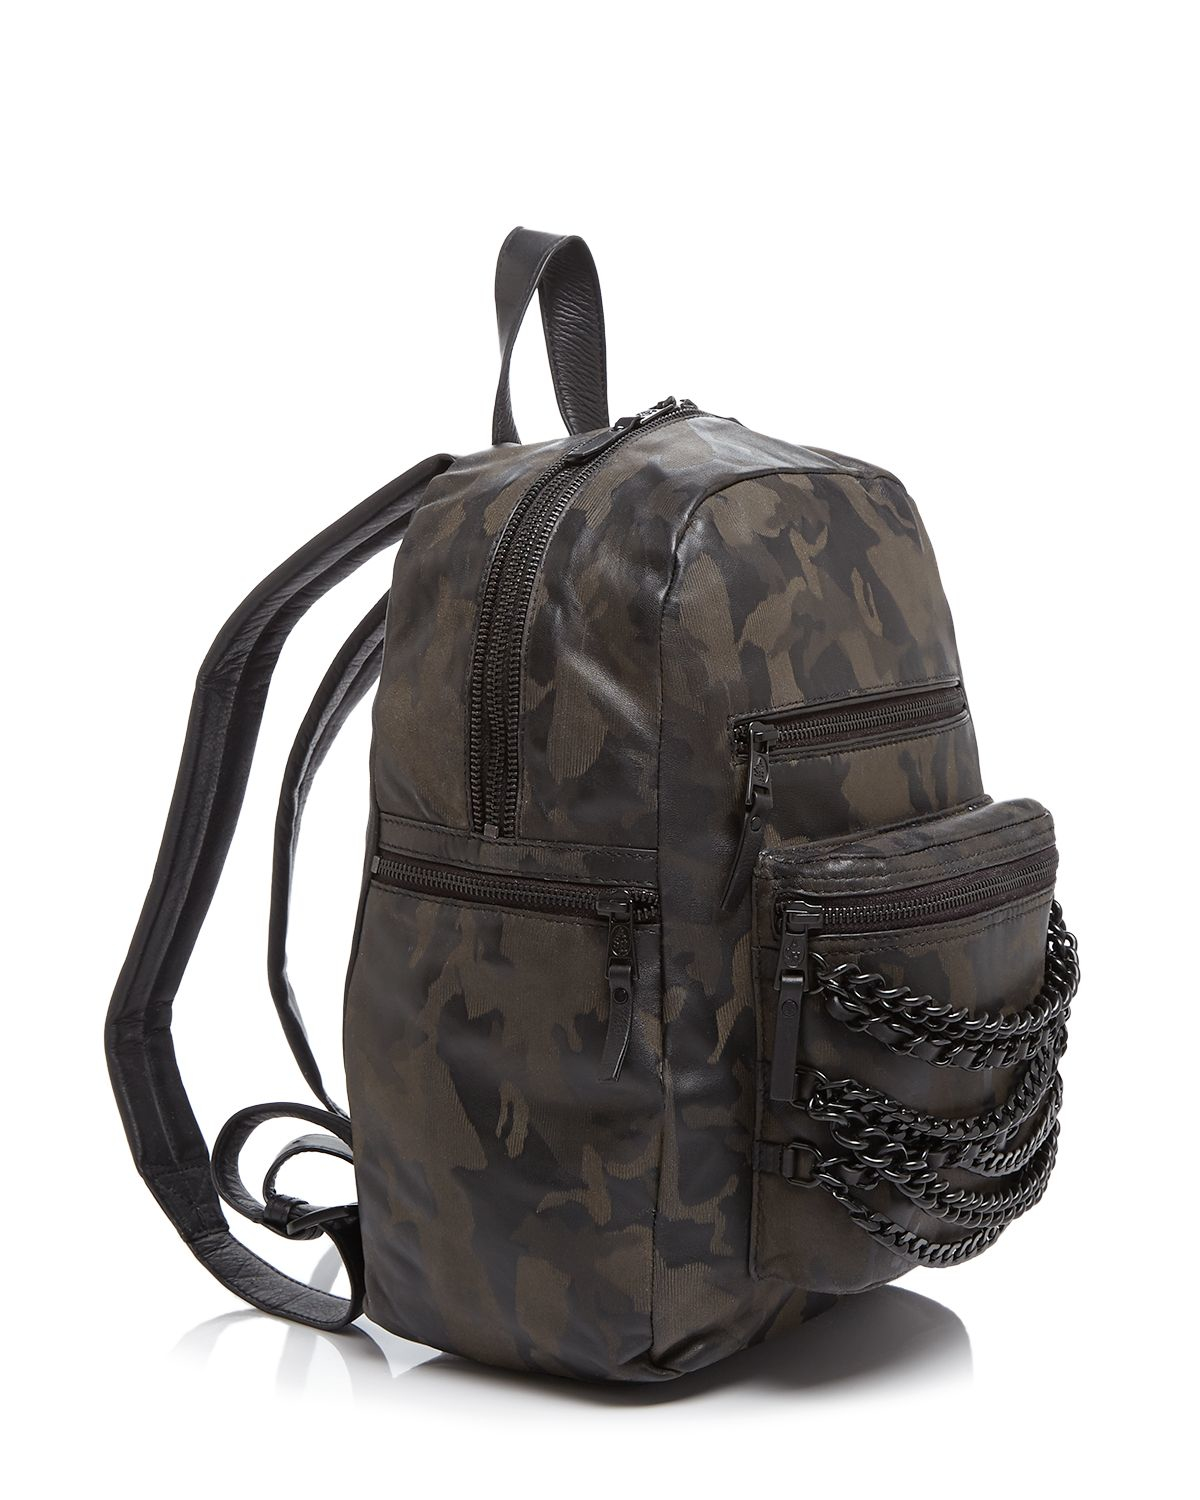 Lyst - Ash Camo Small Backpack in Black